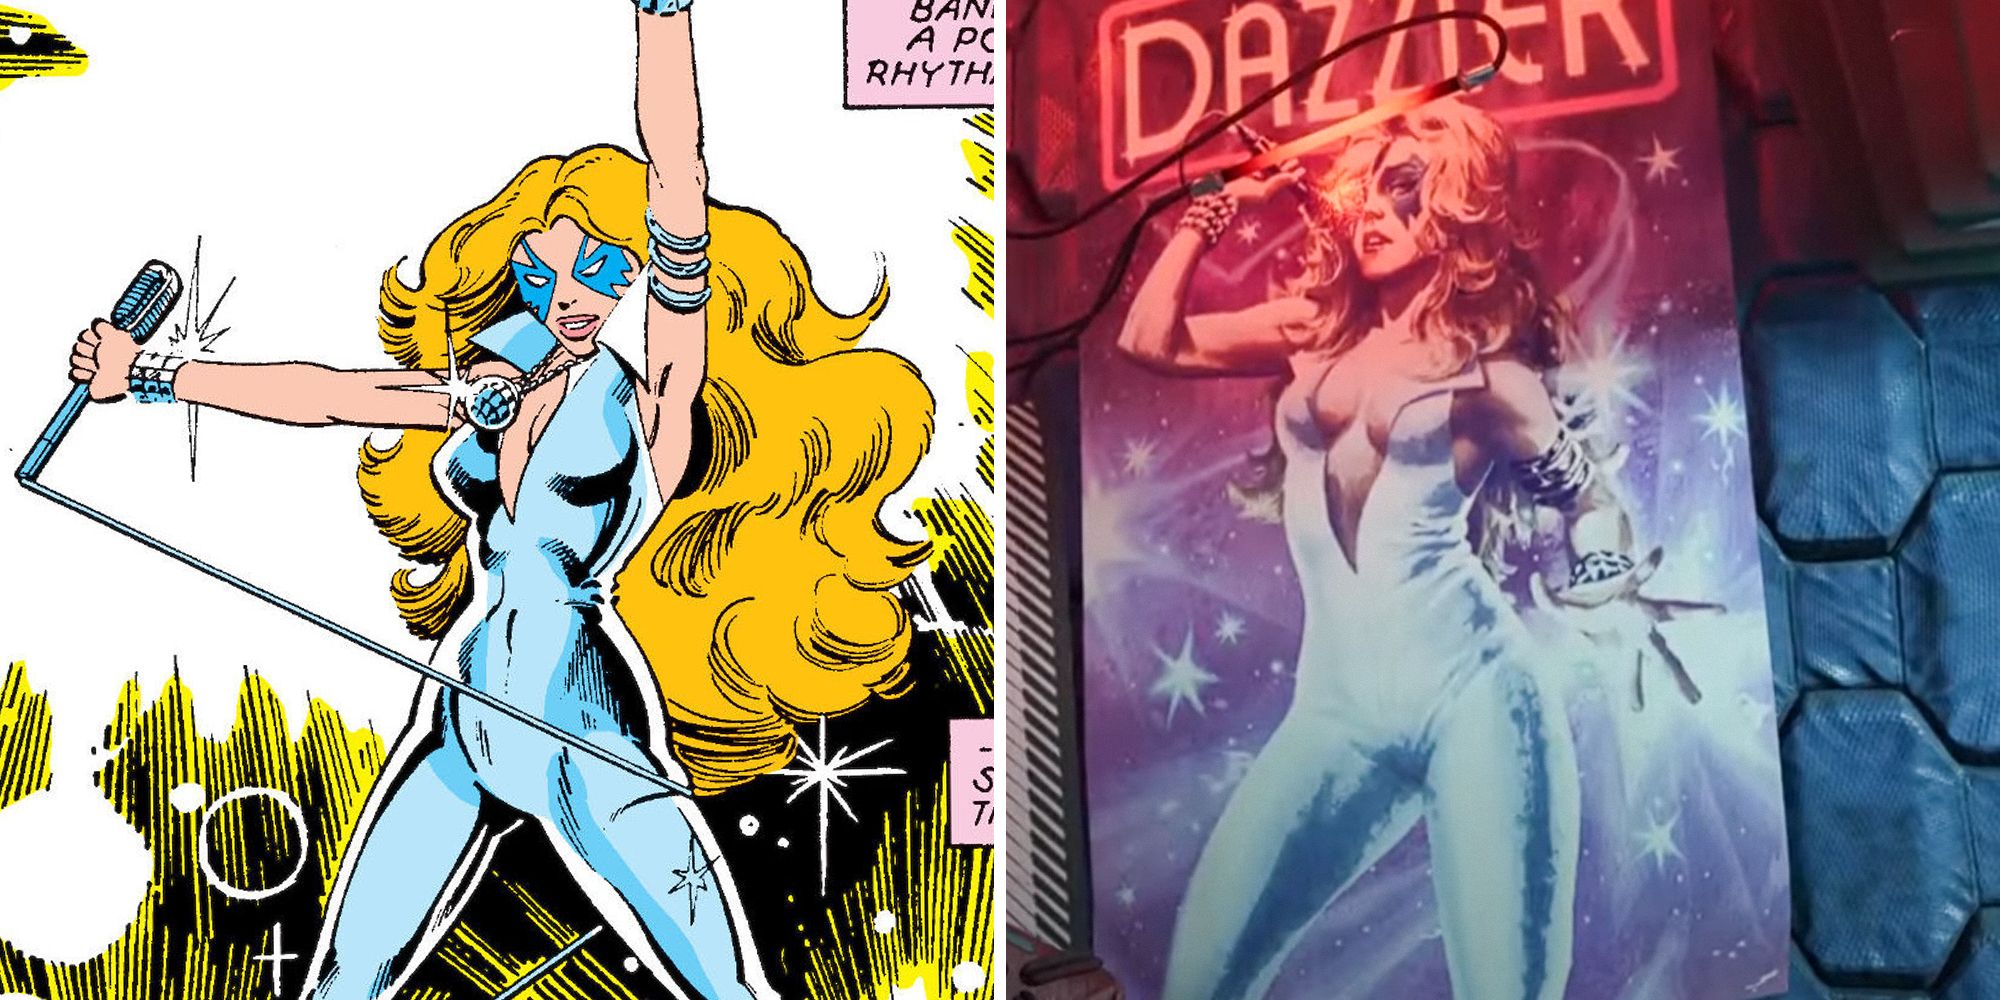 Marvel's Guardians Of The Galaxy. Split image. Dazzler comic on the left and Dazzler poster on the right.